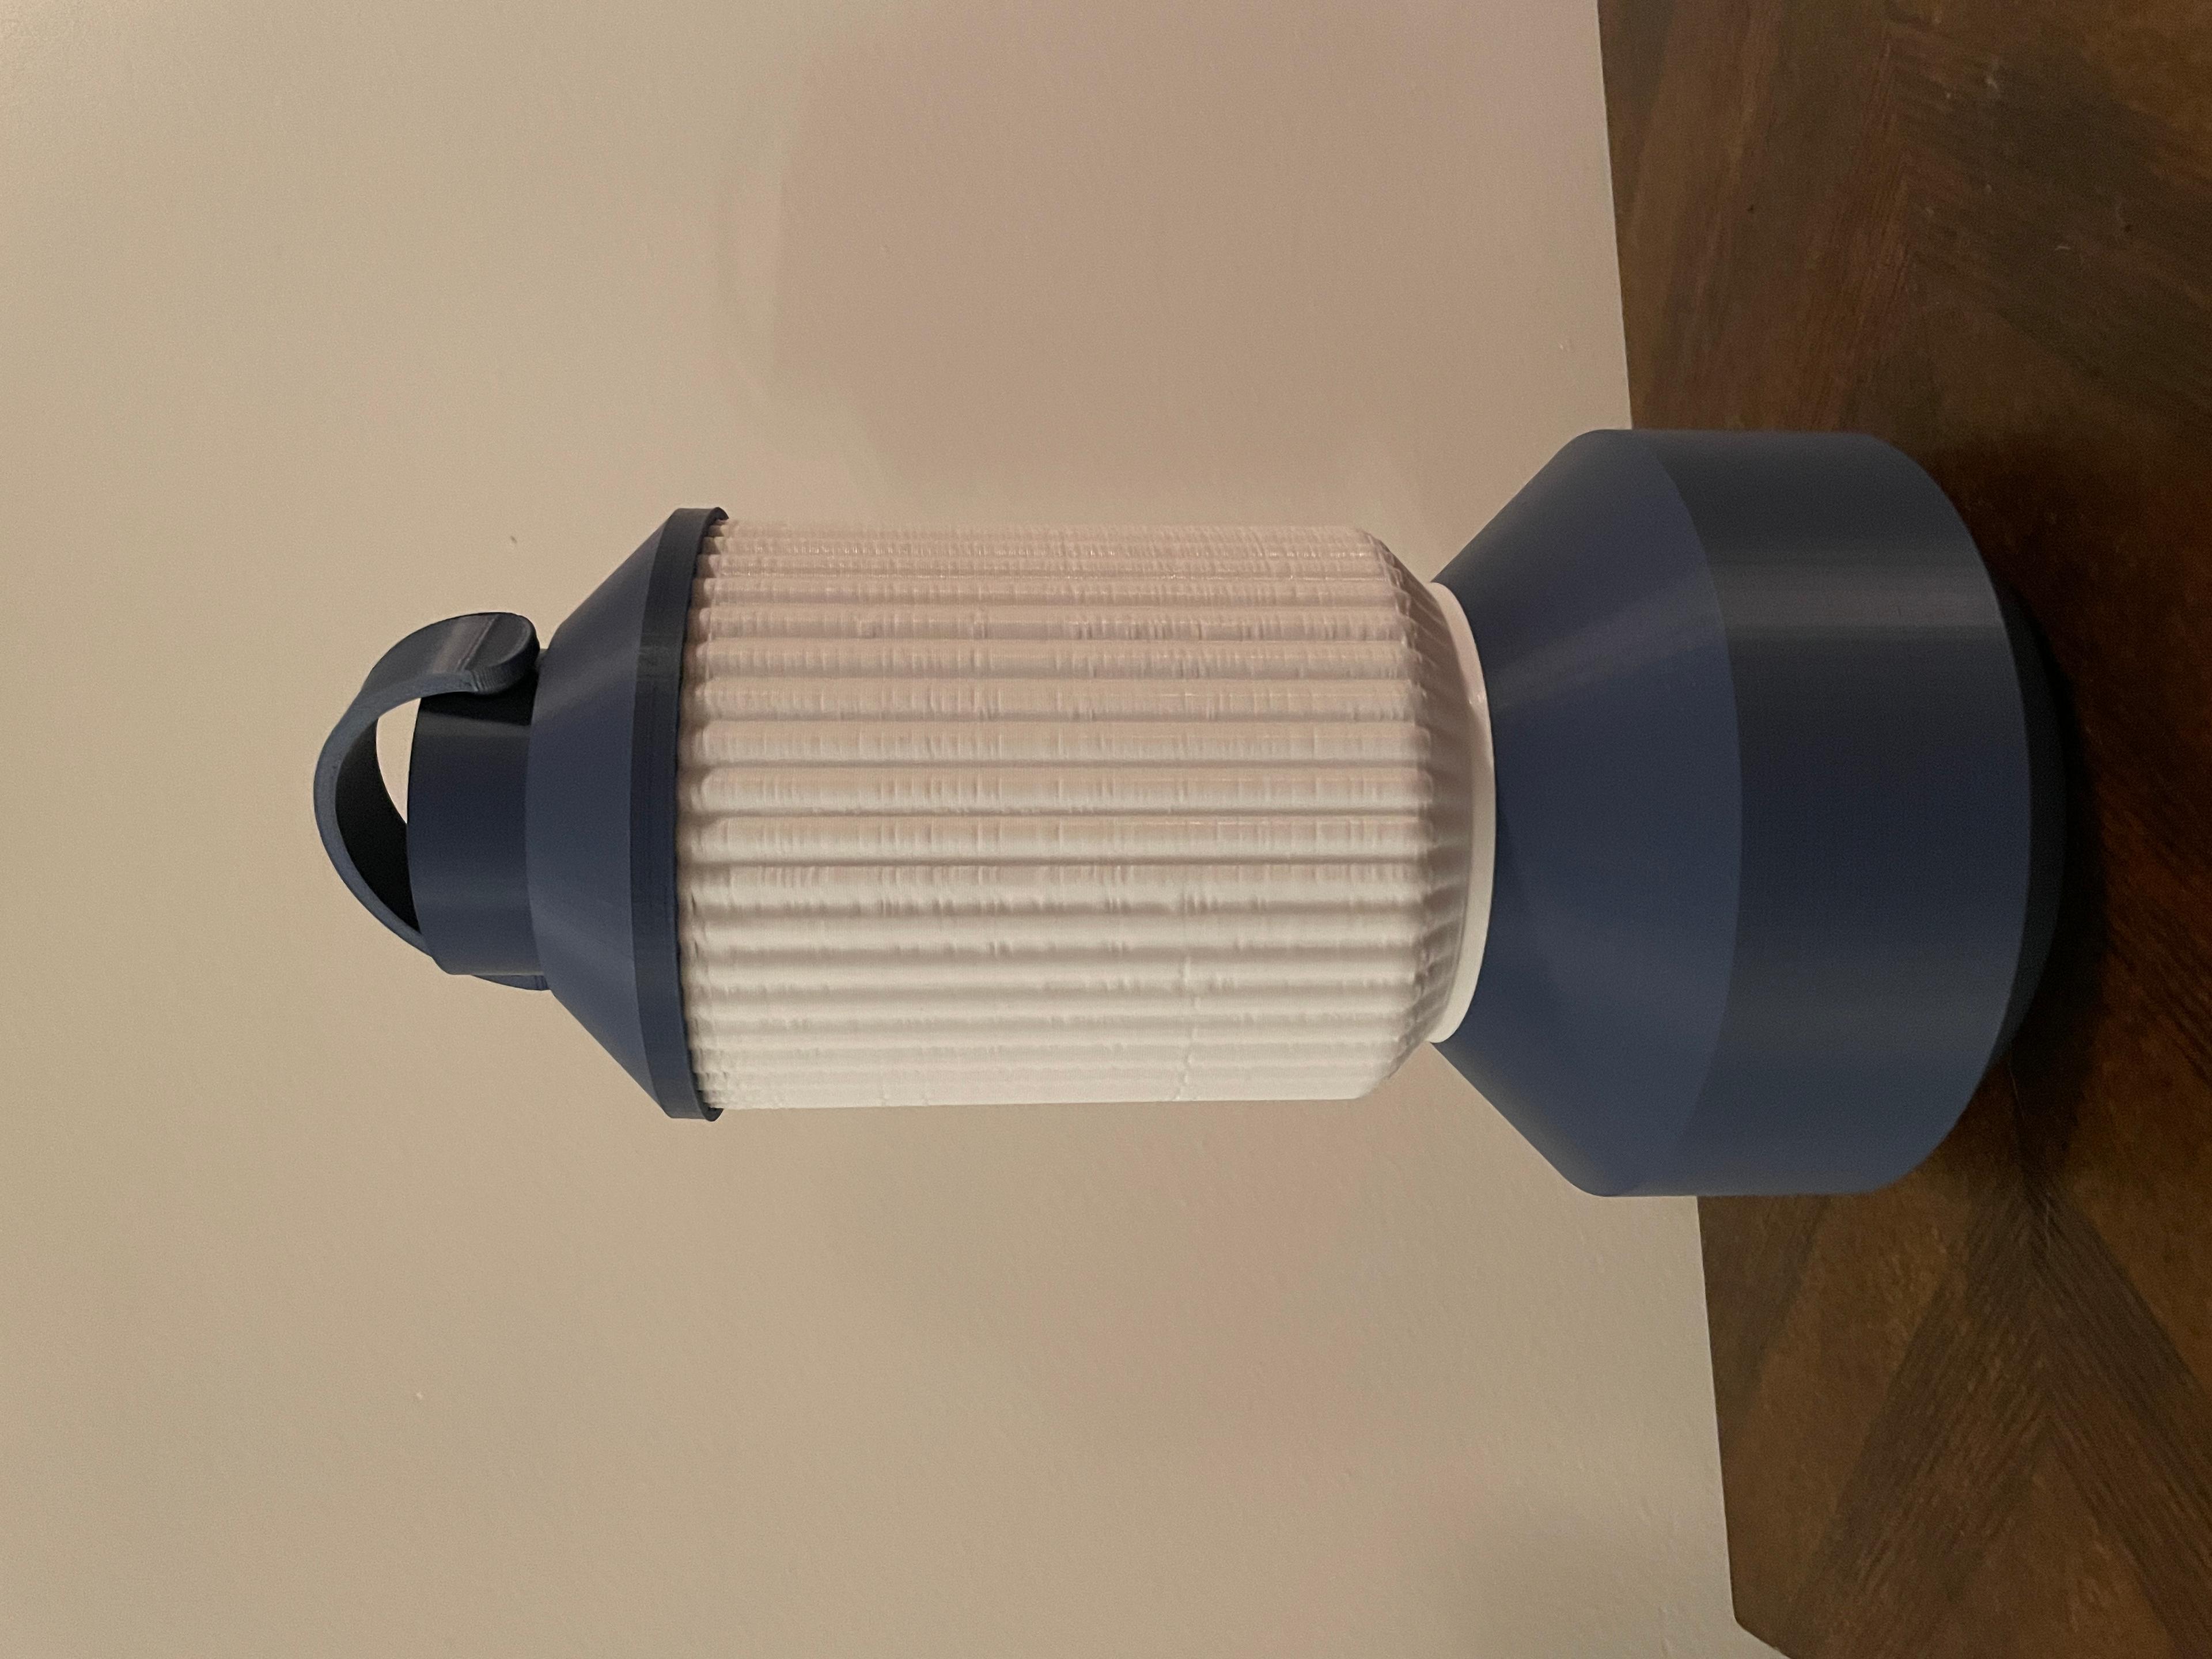 Modern Table Lamp - Photo of the lamp in a living room - 3d model